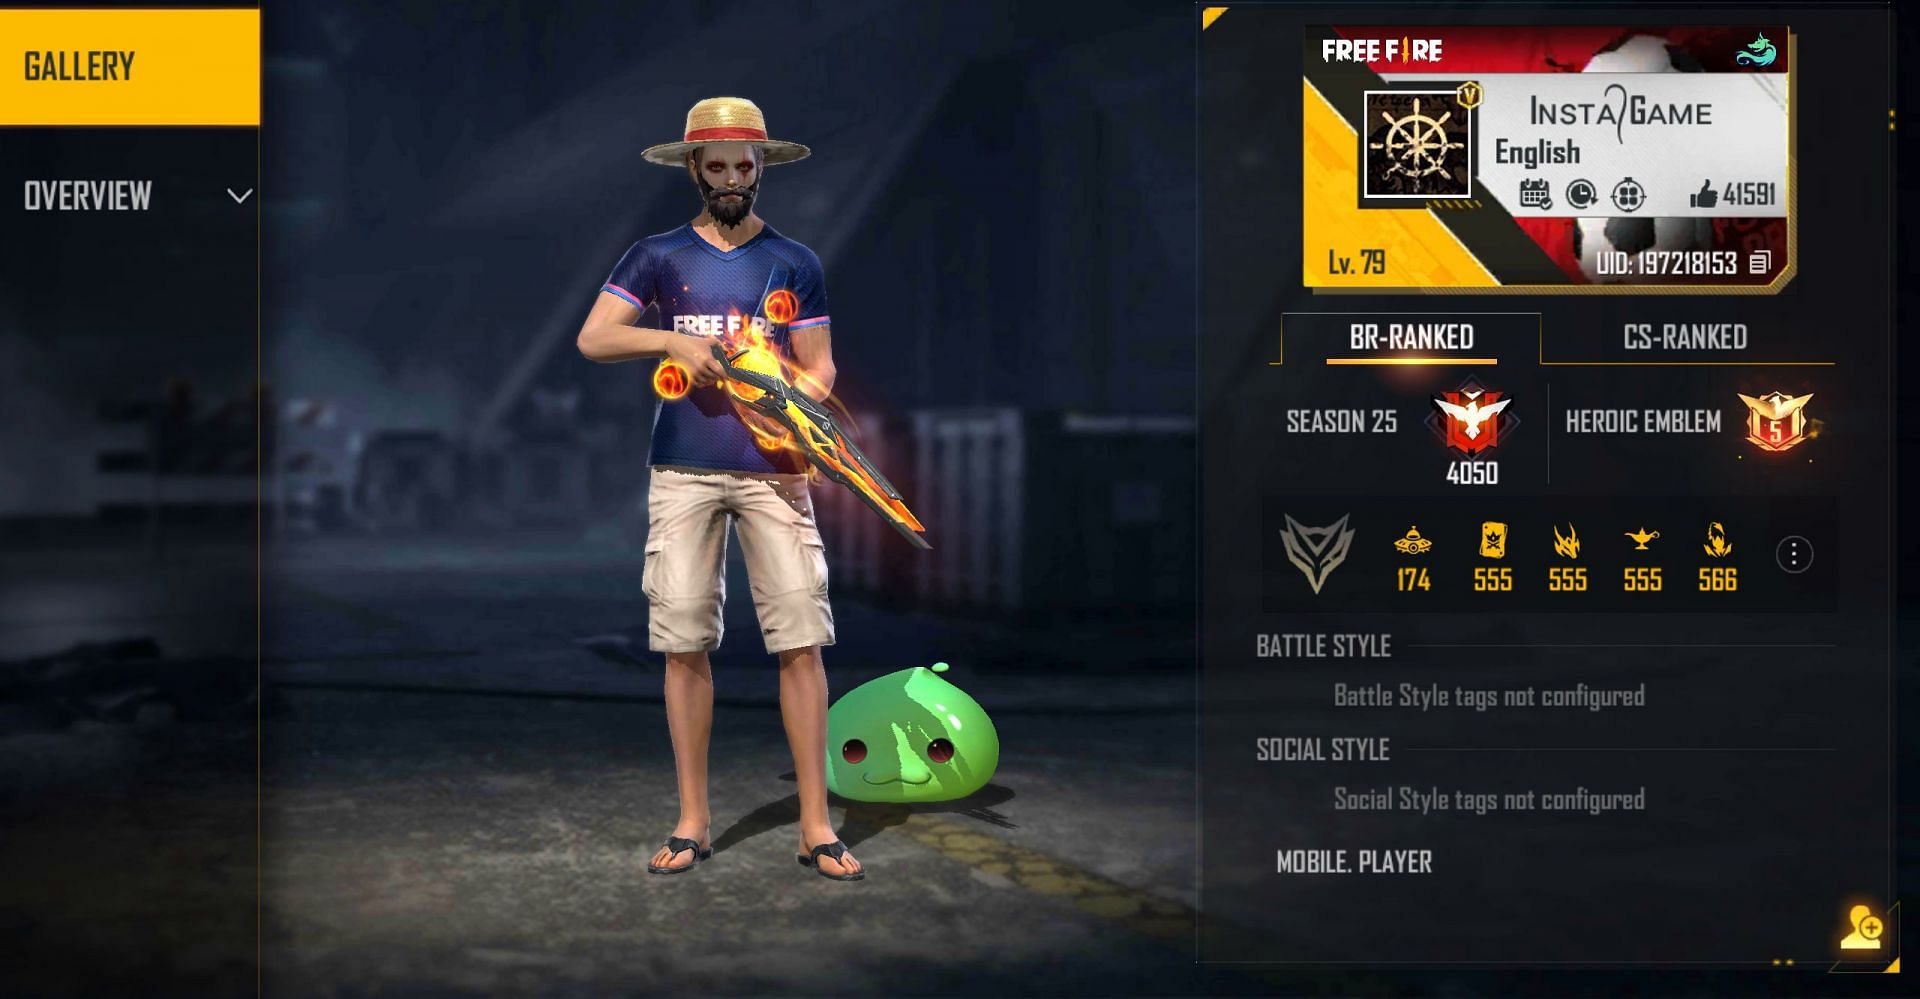 Insta Gamer is a Free Fire YouTuber (Image via Free Fire)